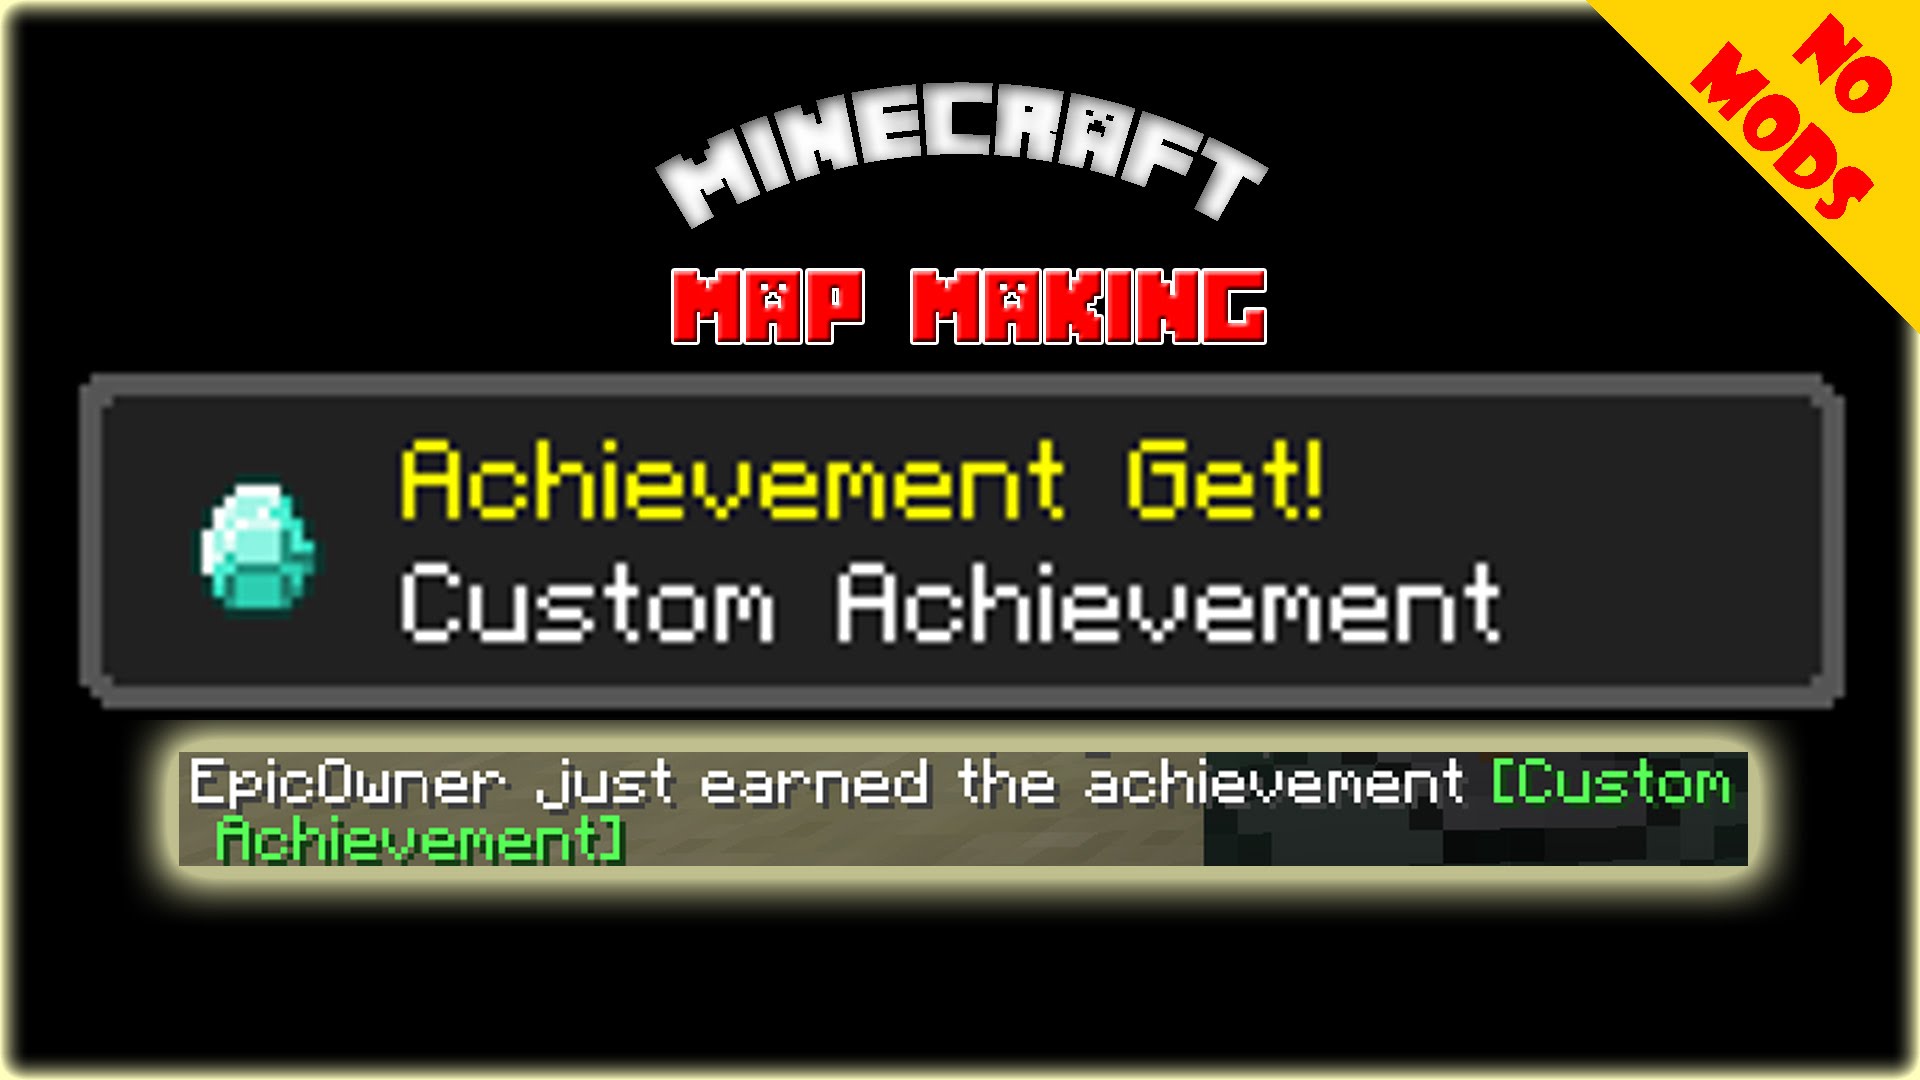 How To Make Custom Achievements in MInecraft! - YouTube